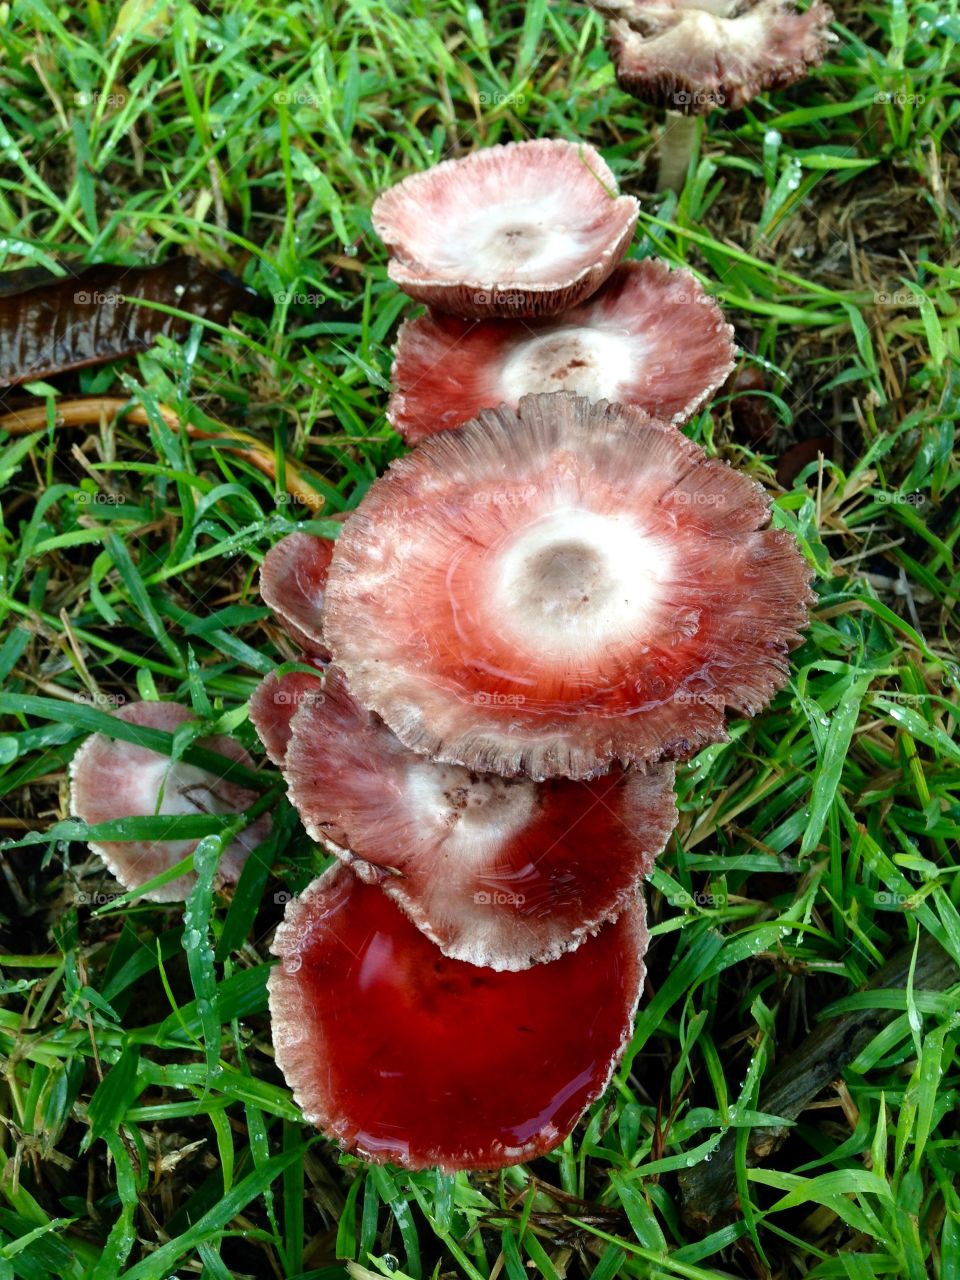 Tropical mushrooms in the grass